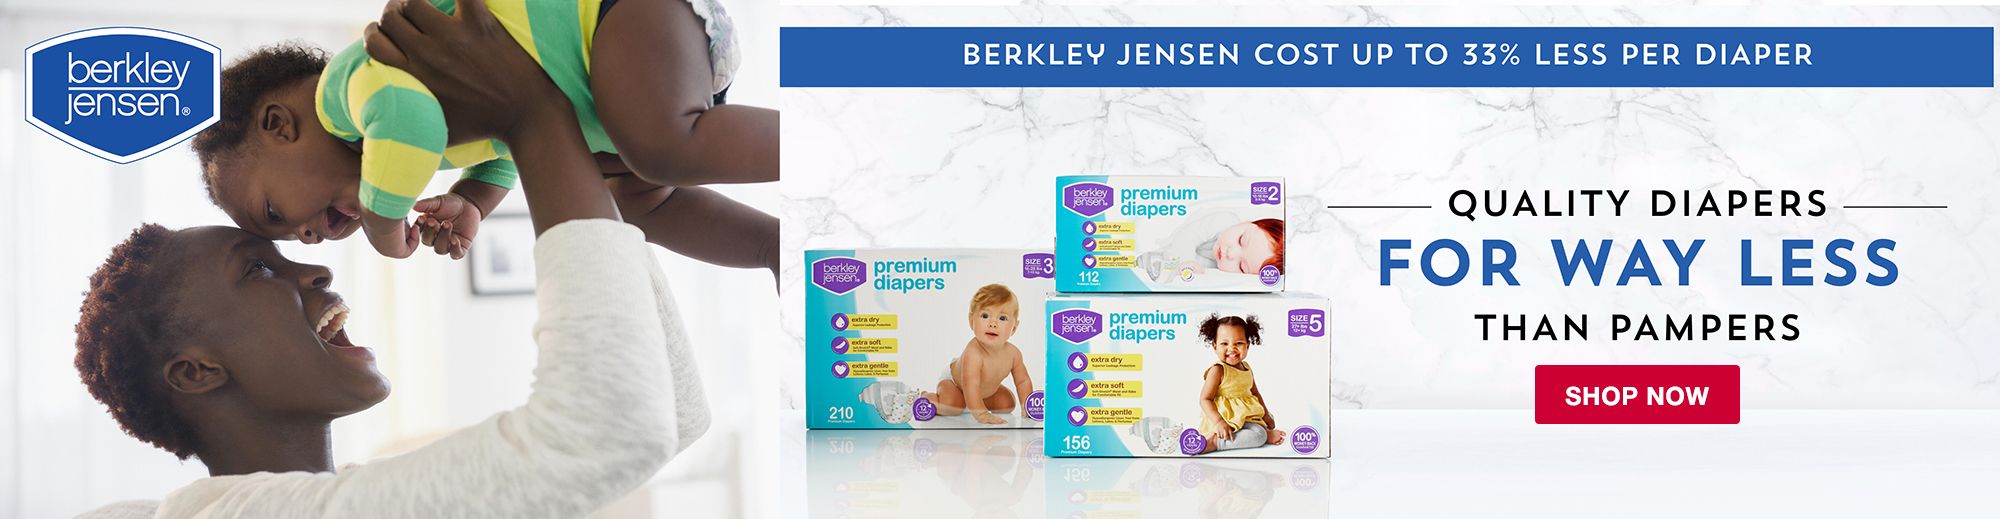 Berkley Jensen costs up to 33 percent less per diaper. Quality diapers for way less than Pampers. Click to shop now.